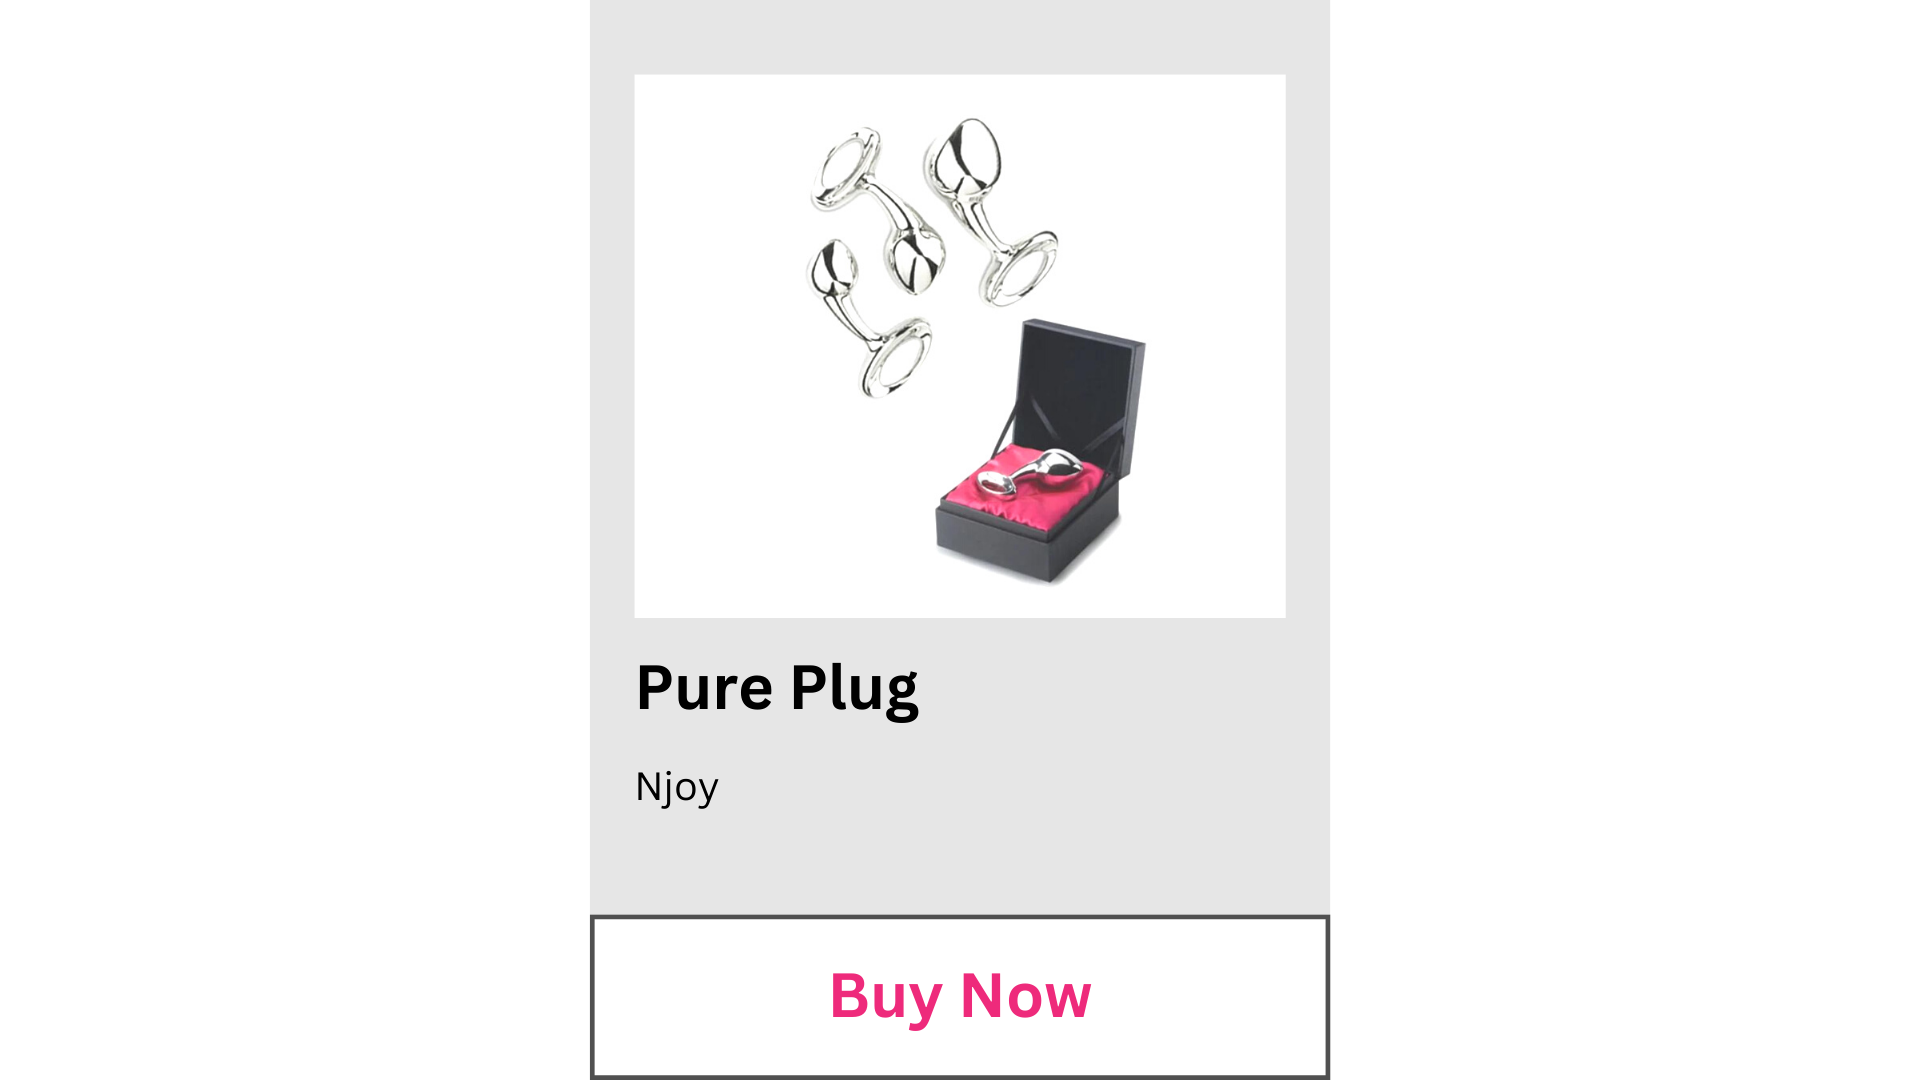 Buy the Pure Plug from Njoy.